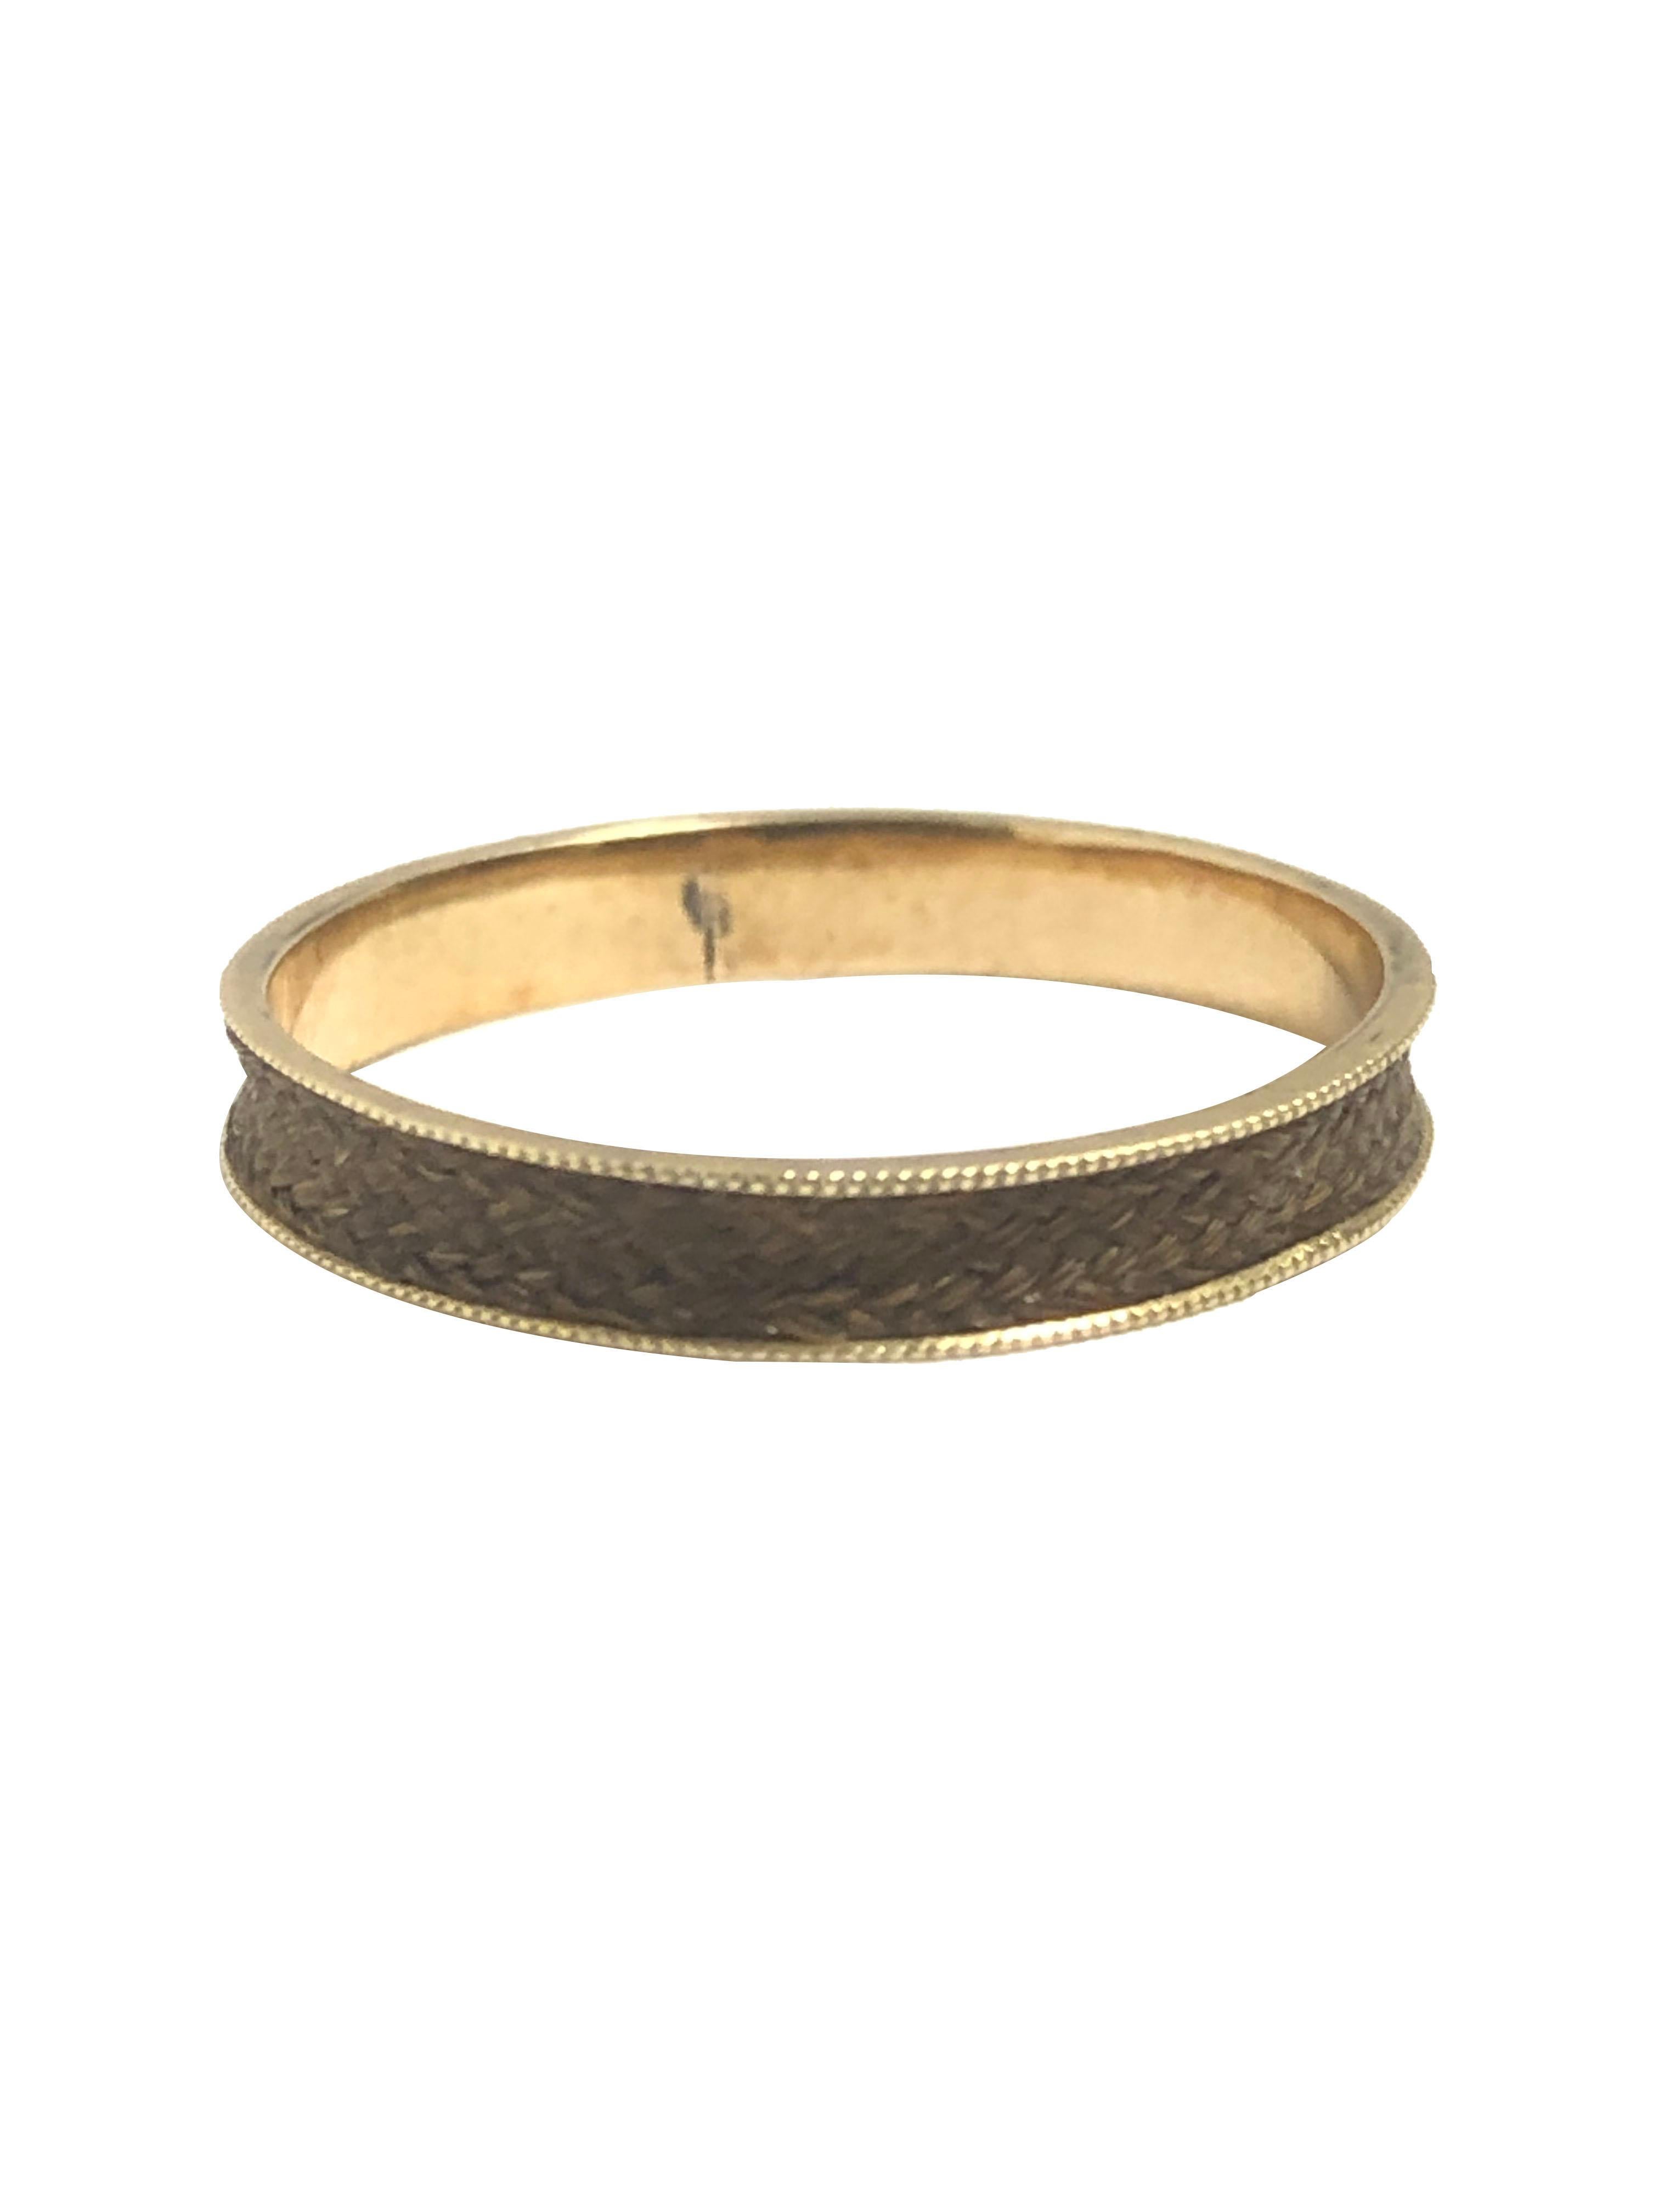 Circa 1850s Yellow Gold Mourning, Memorial Band Ring, measuring 1/4 inch wide with  delicate Milgrain edges, the center is very finely Woven Hair, a center Gold section has the Initials E.W. Finger size 8 1/2 